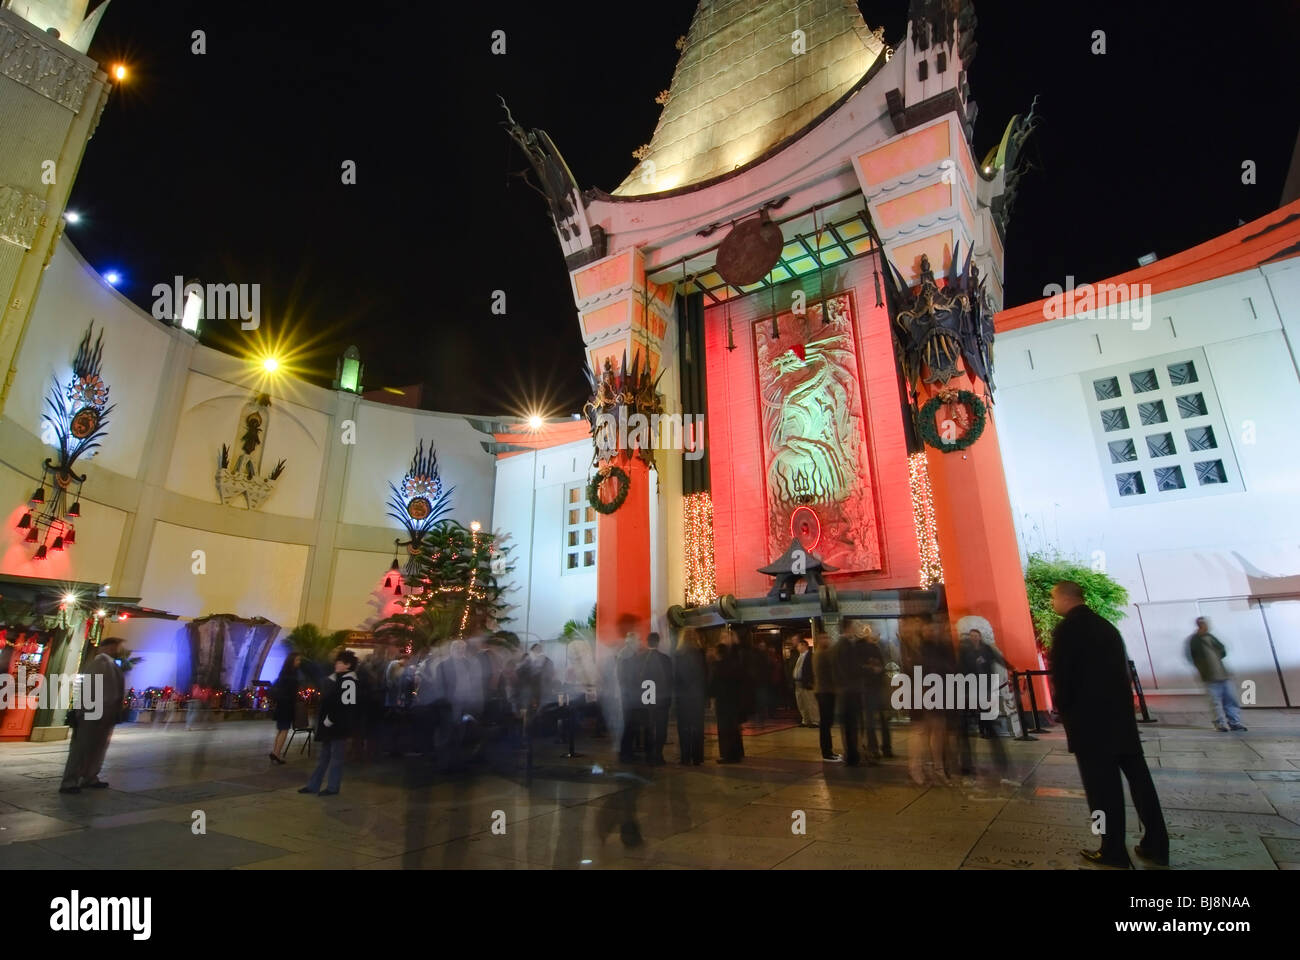 Grauman's Chinese Theatre in Hollywood, California. Stock Photo